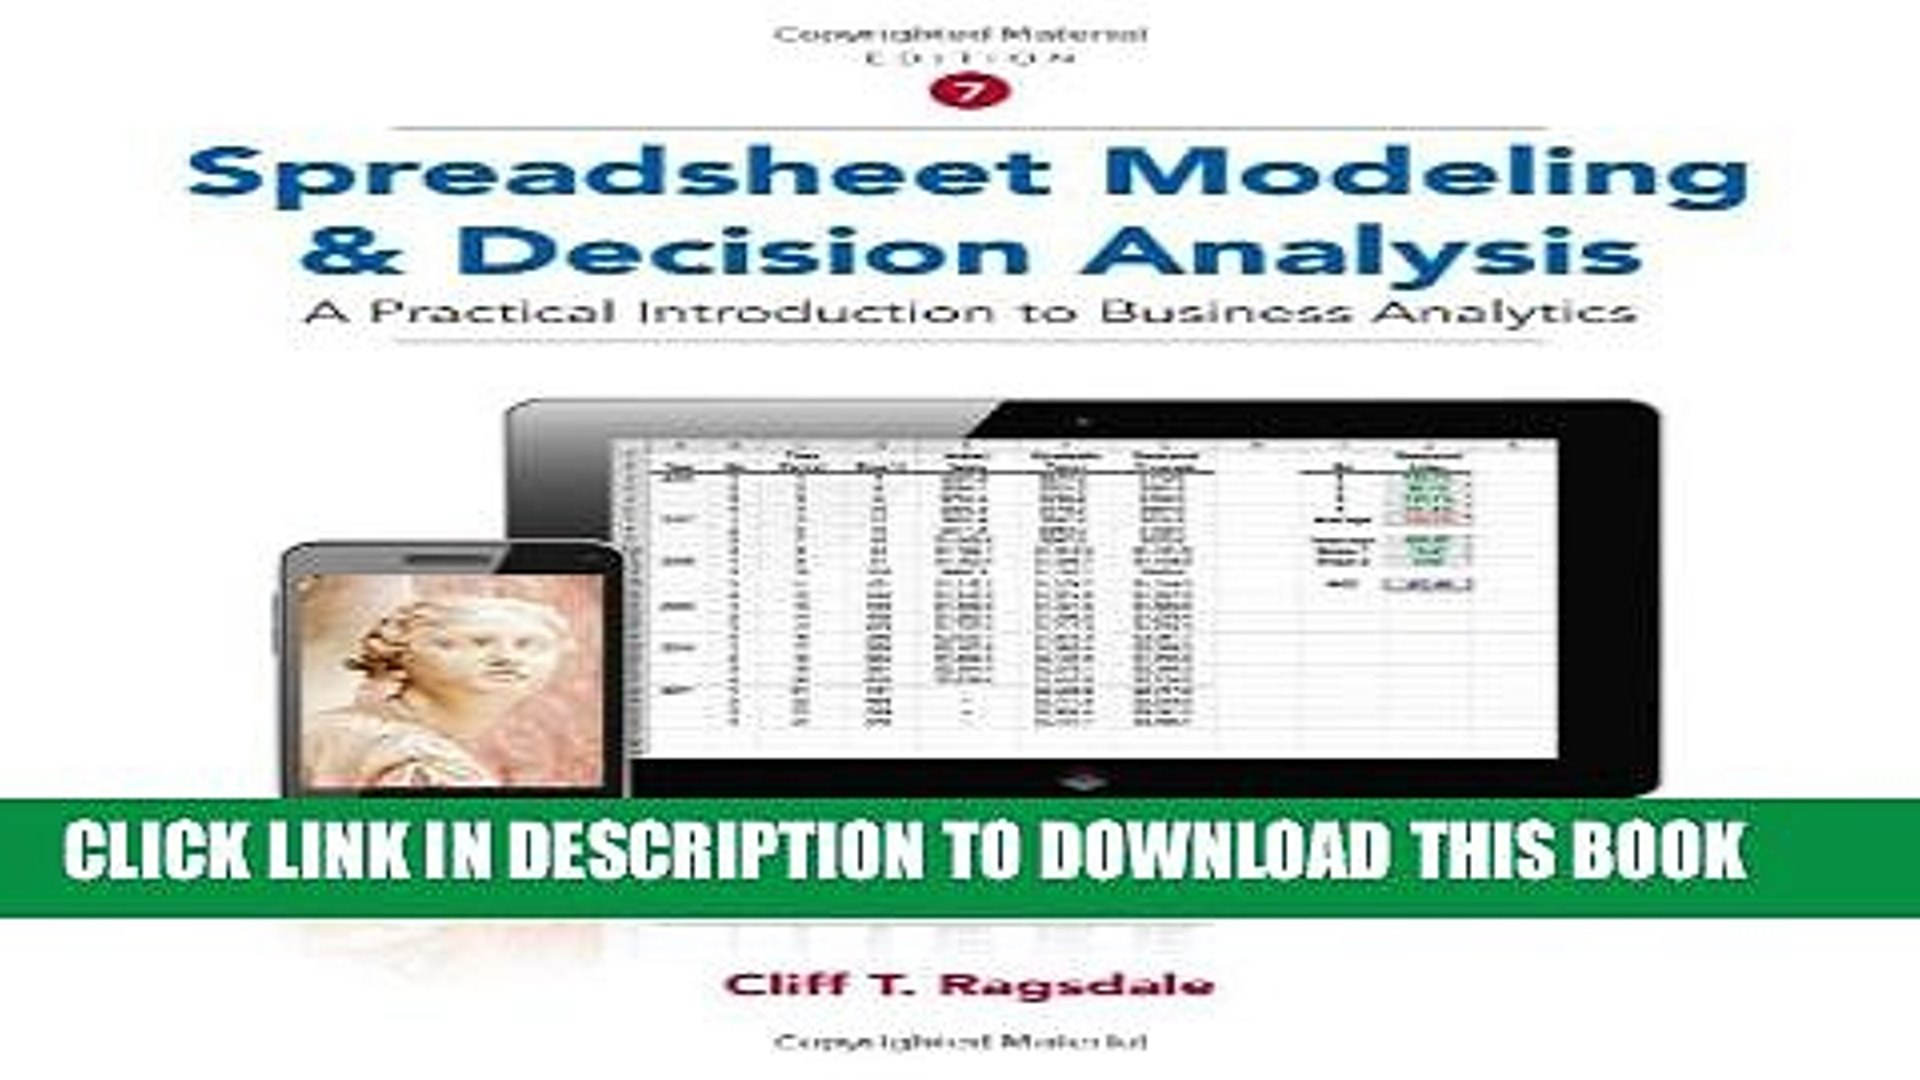 Spreadsheet Modeling And Decision Analysis Within Pdf] Spreadsheet Modeling And Decision Analysis: A Practical